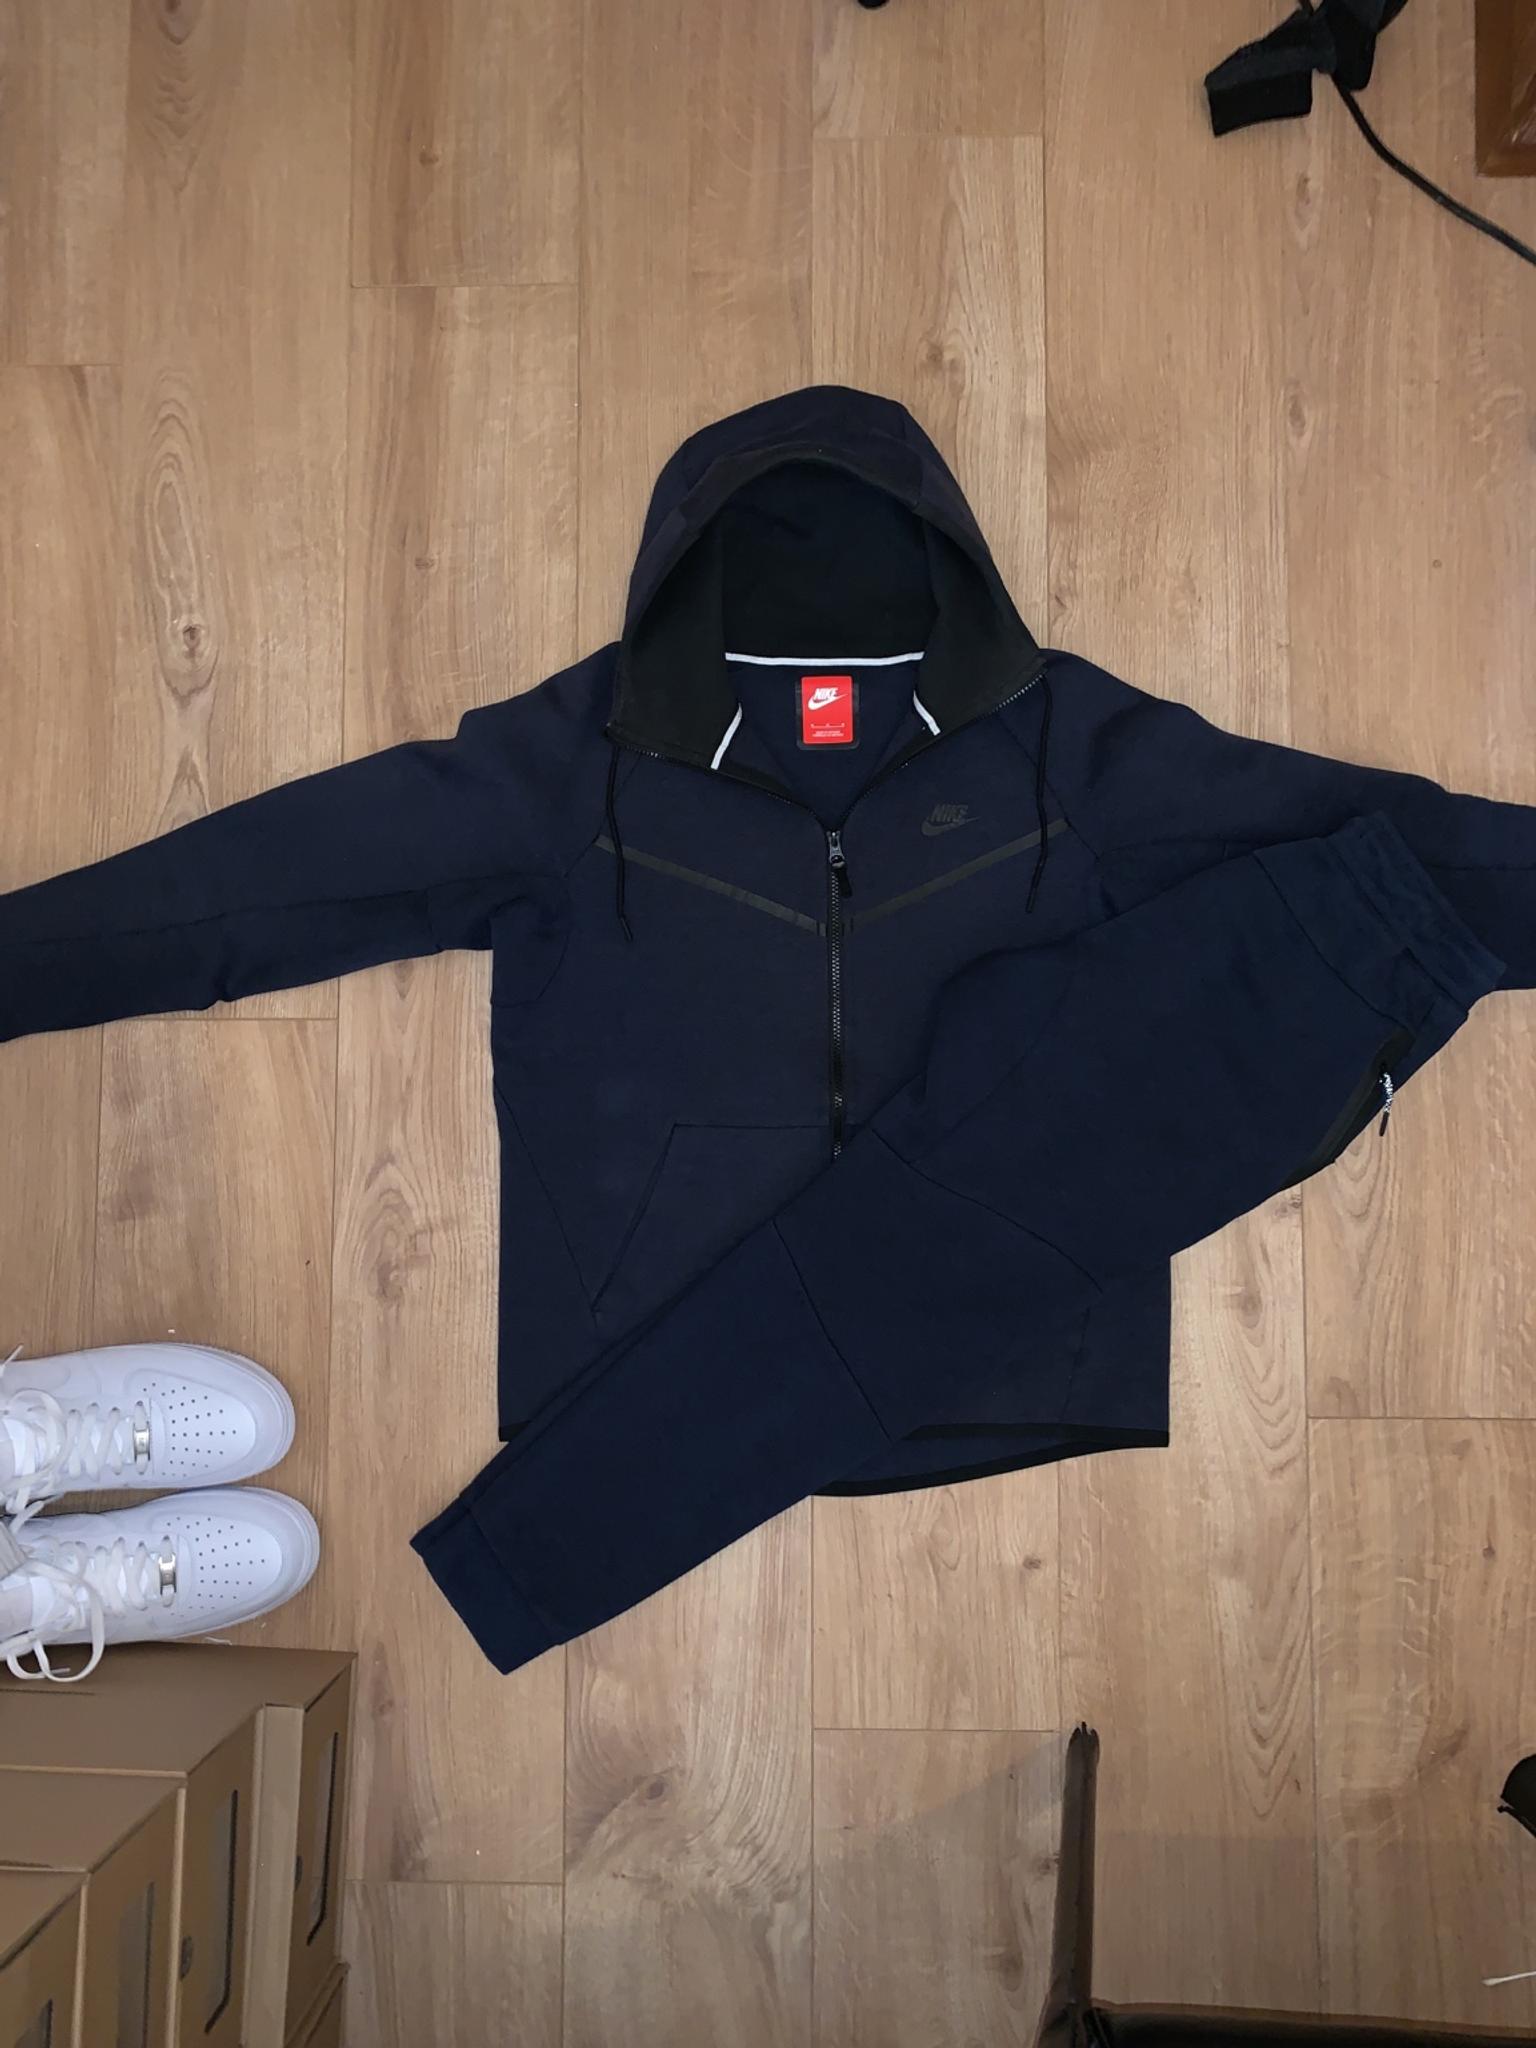 blue and black nike tech tracksuit